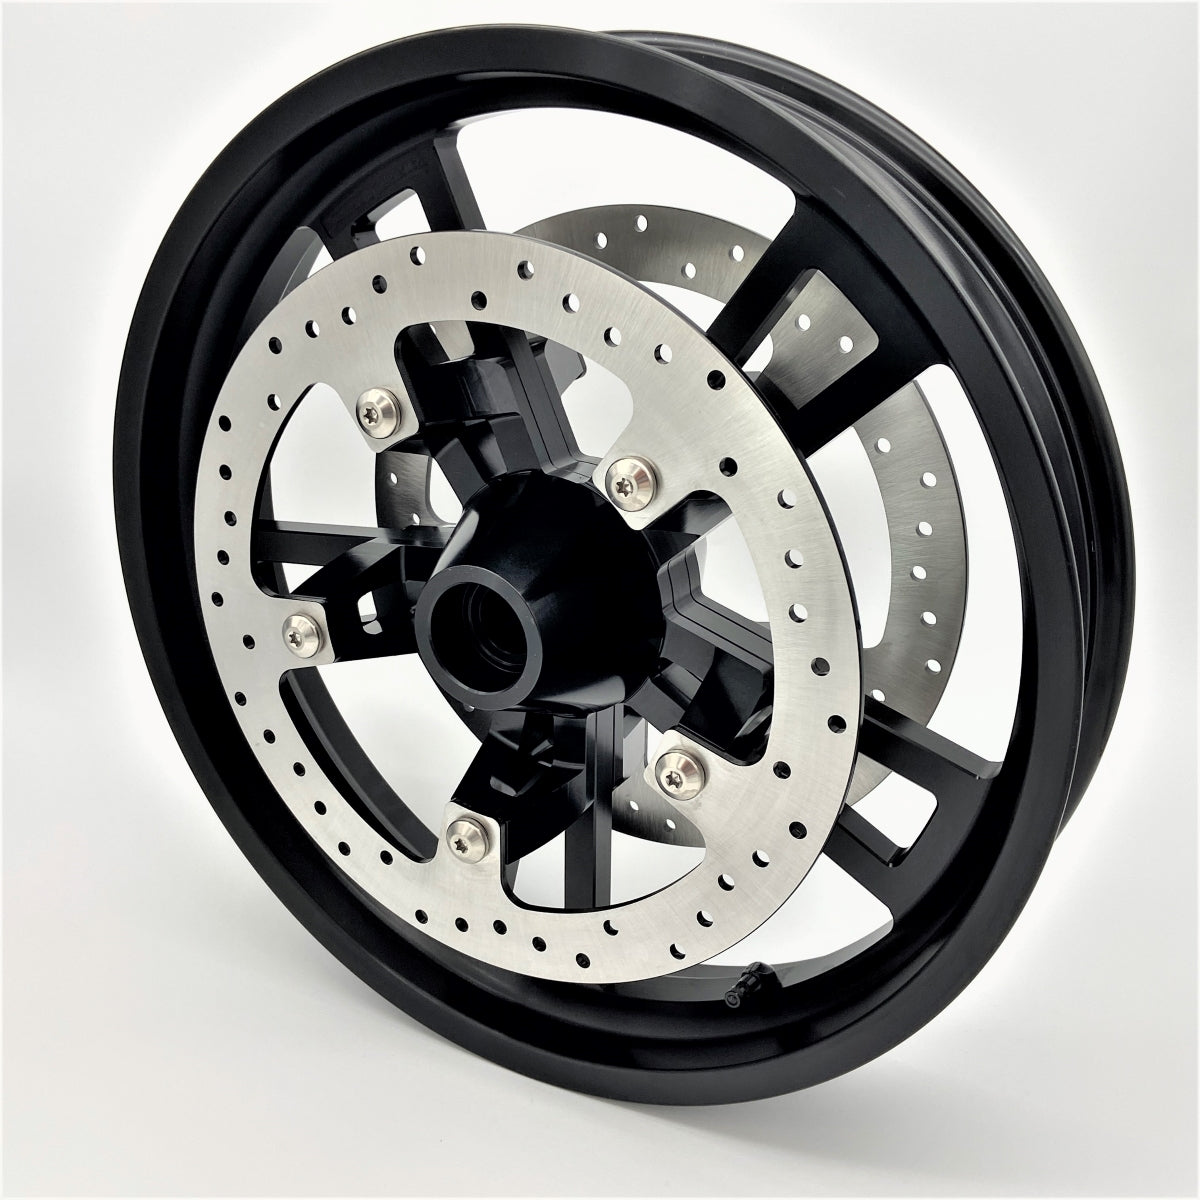 GeezerEngineering 19” or 21” Front Wheel Kit Enforcer Style with 14" Brake Rotors for Harley